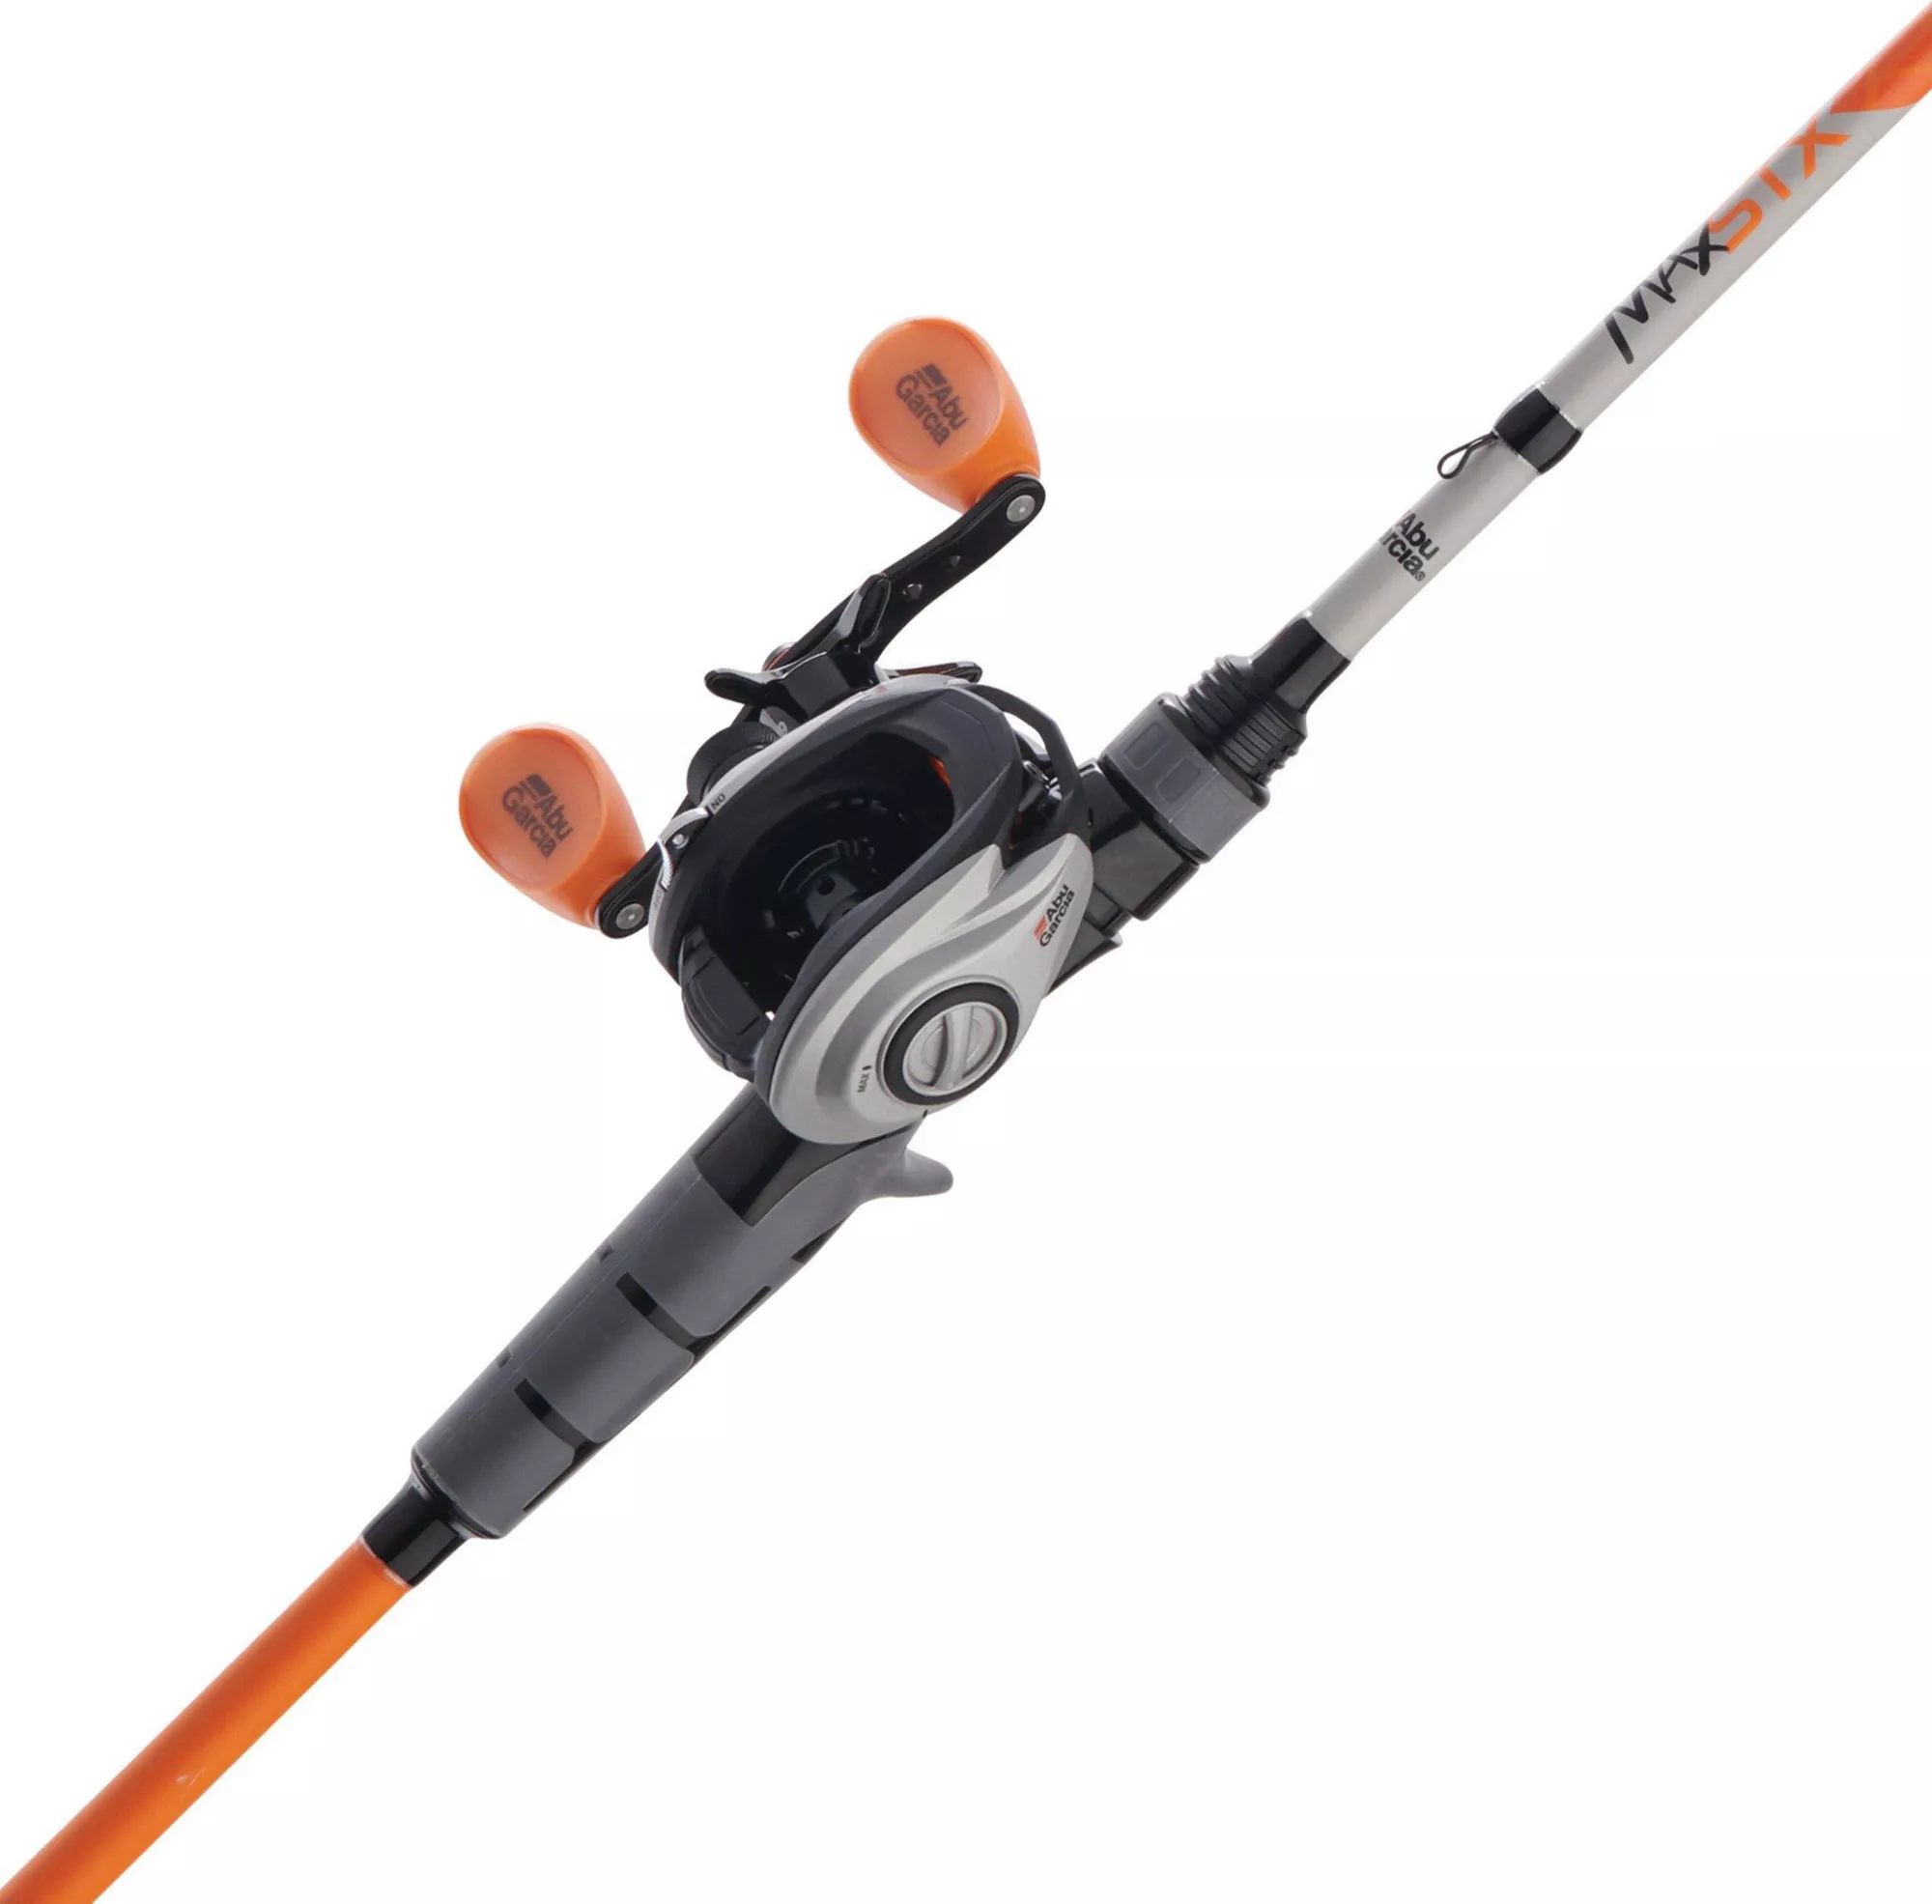 Tuna Fishing Rods & Poles for sale, Shop with Afterpay